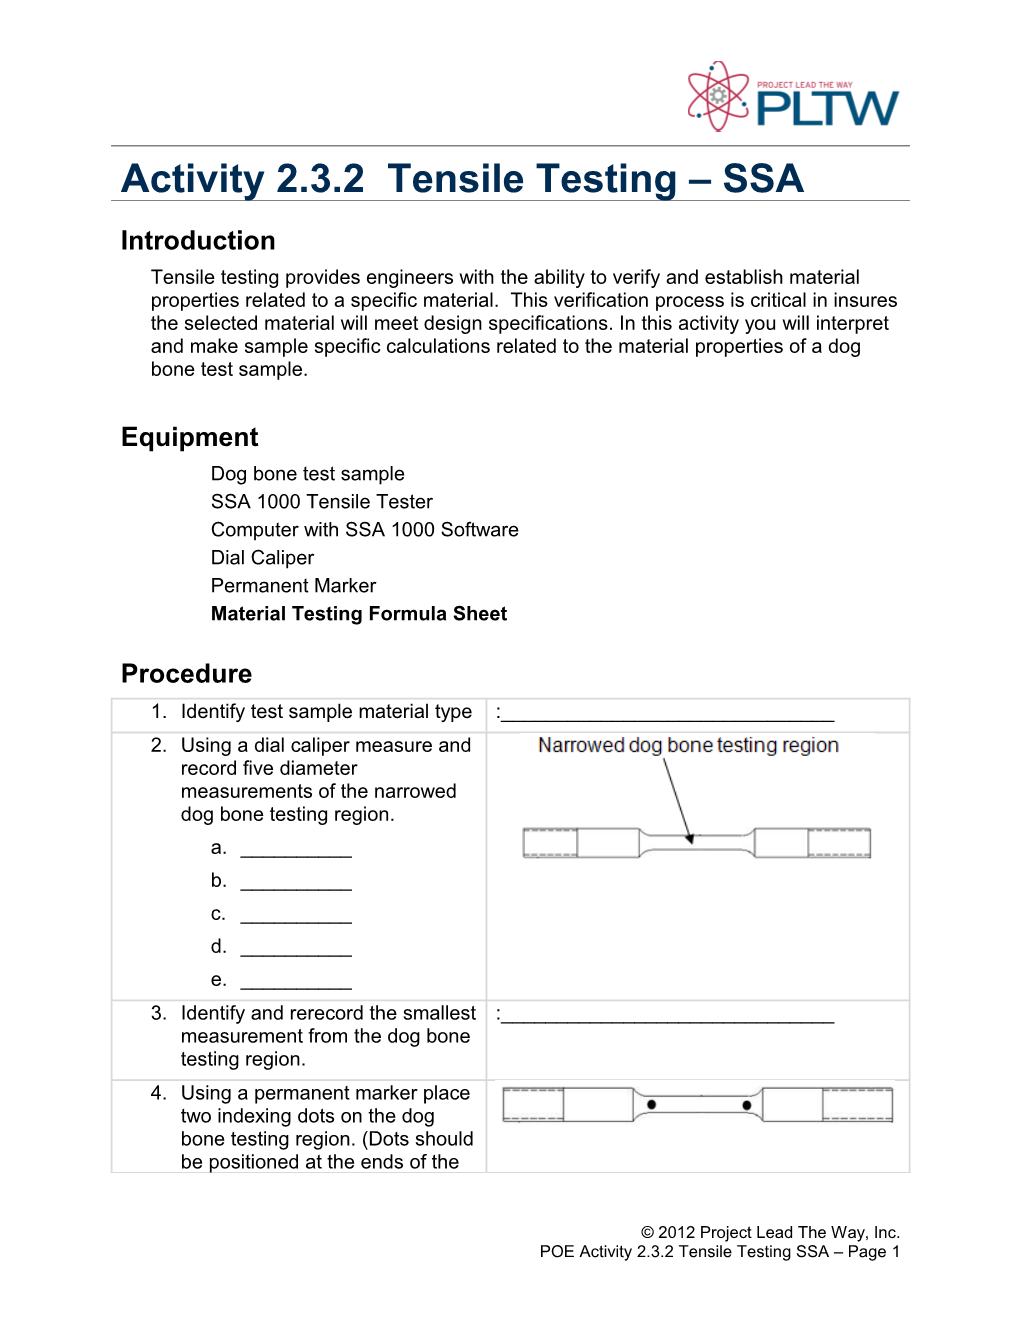 Activity 2.3.2 - Tensile Testing Template - SSA